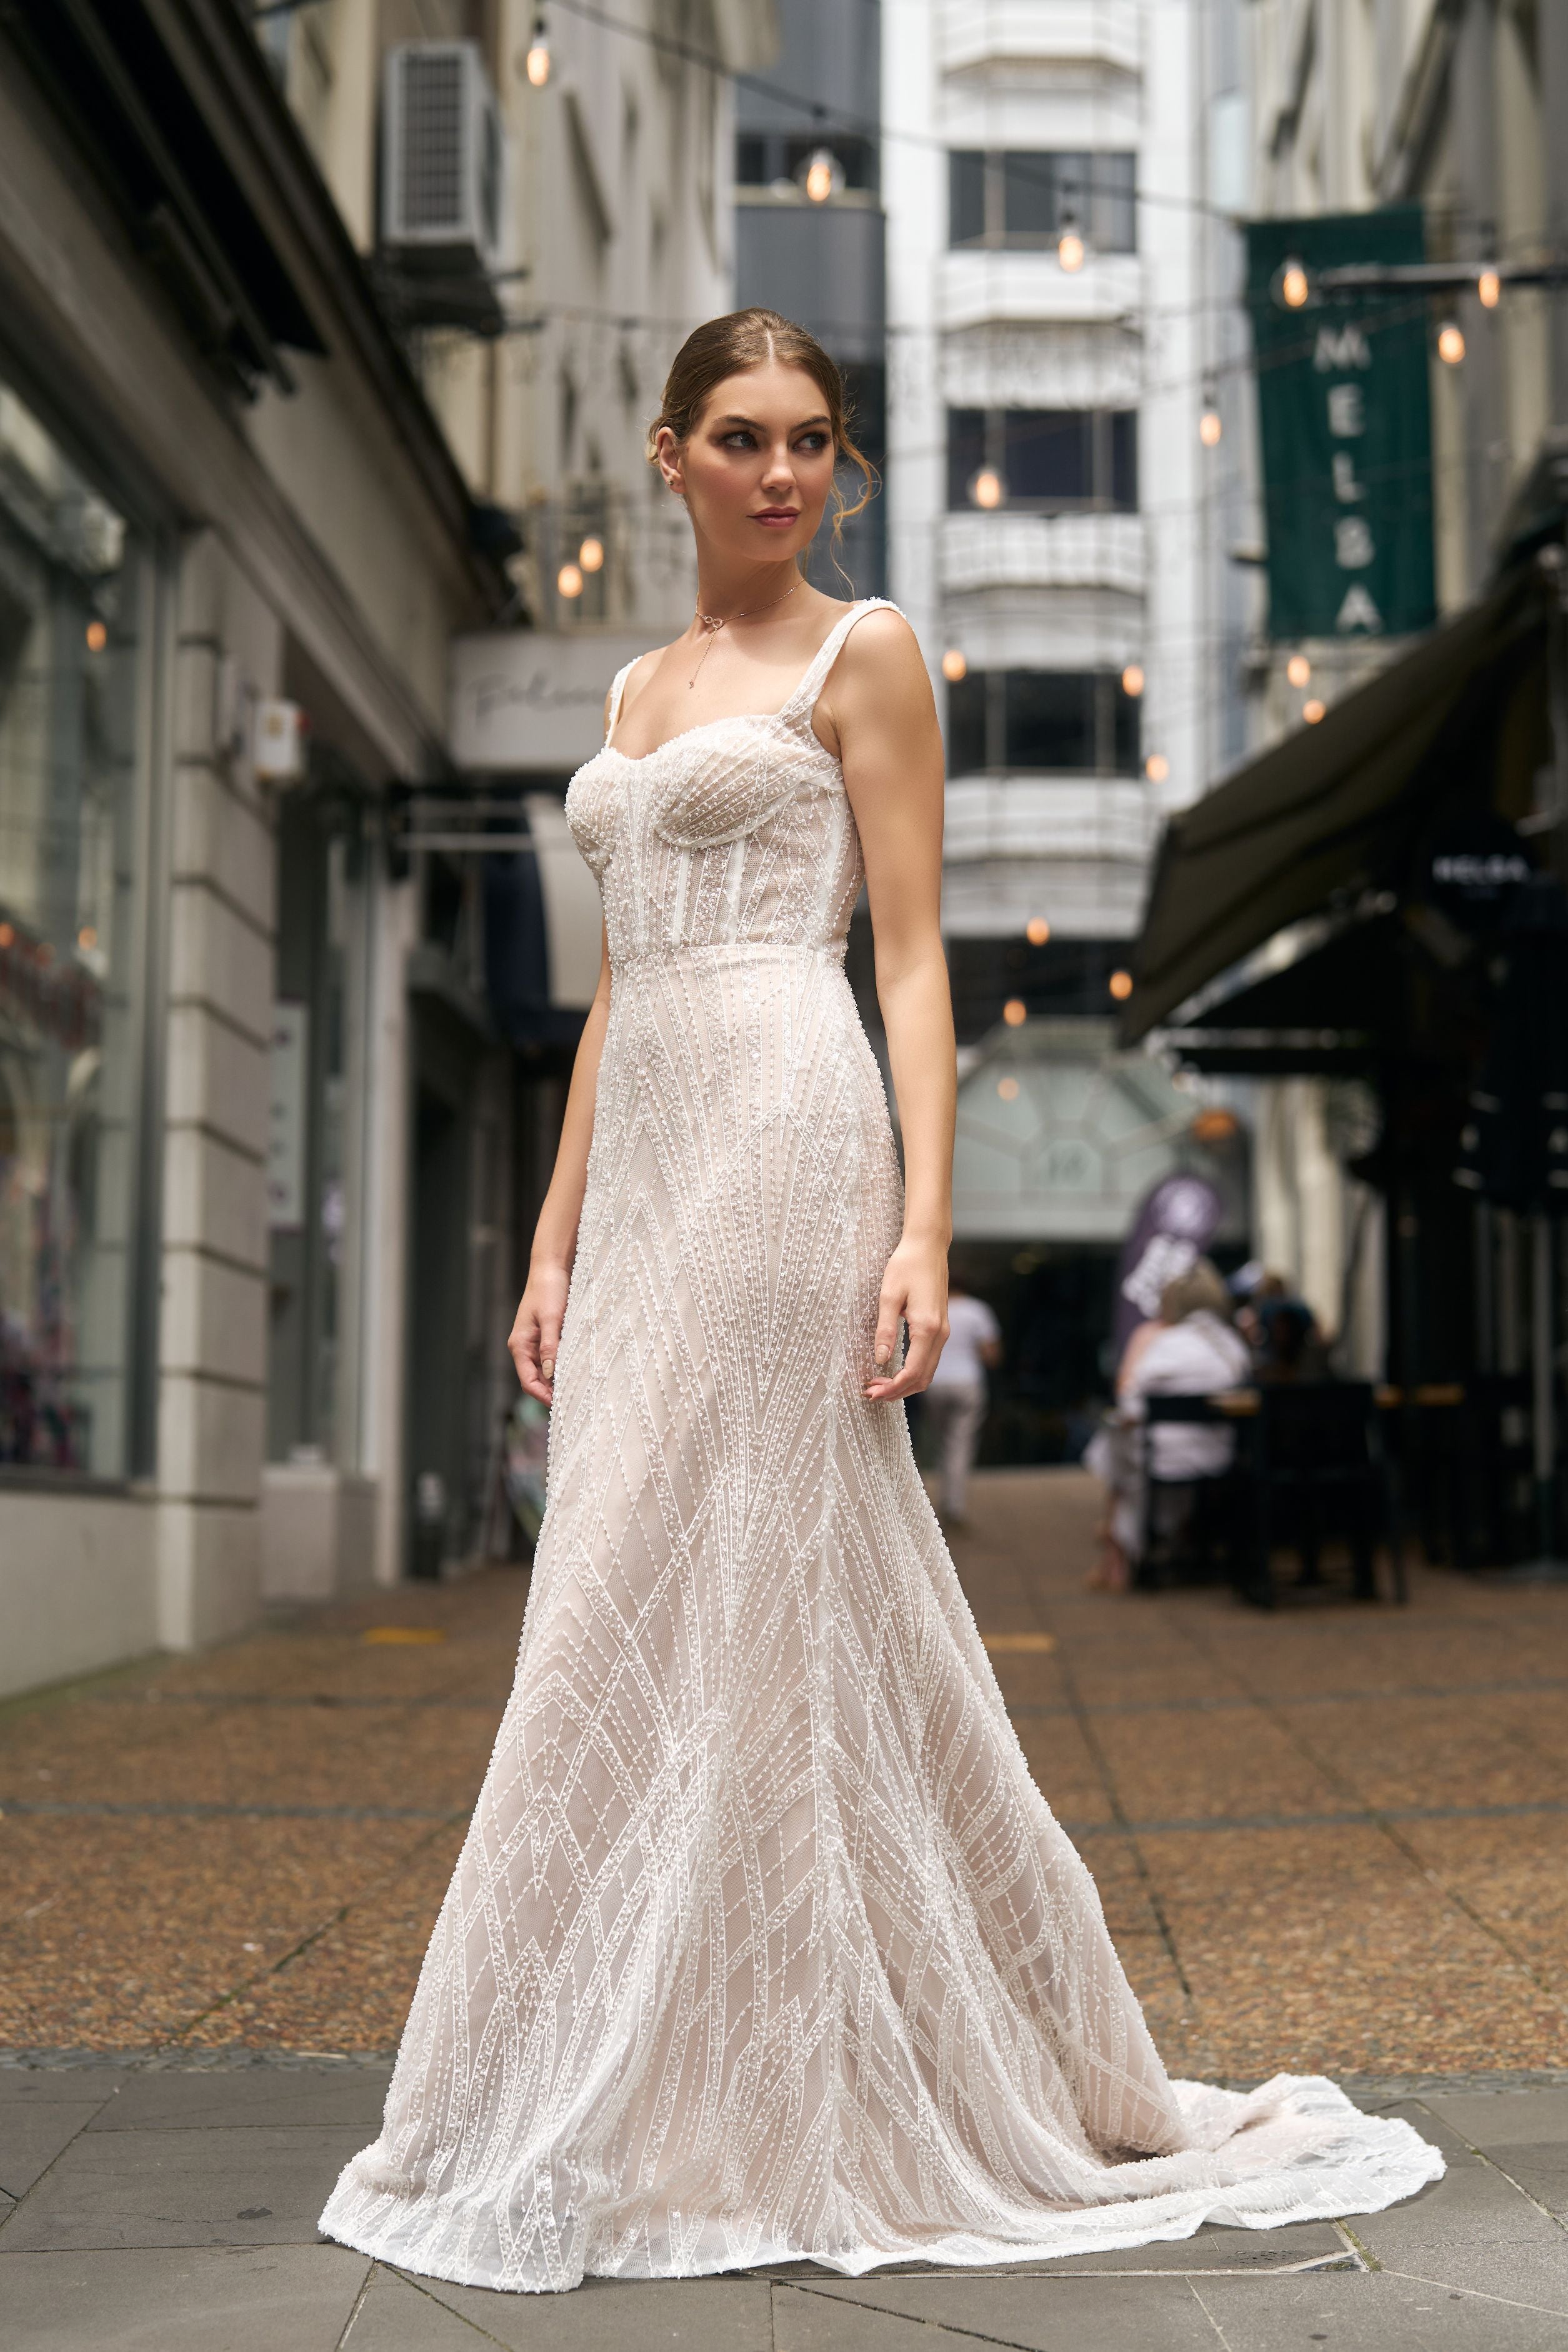 Fashioned with beaded lace, this fit-n-flare gown features a square neckline and fully boned bodice and beaded straps.